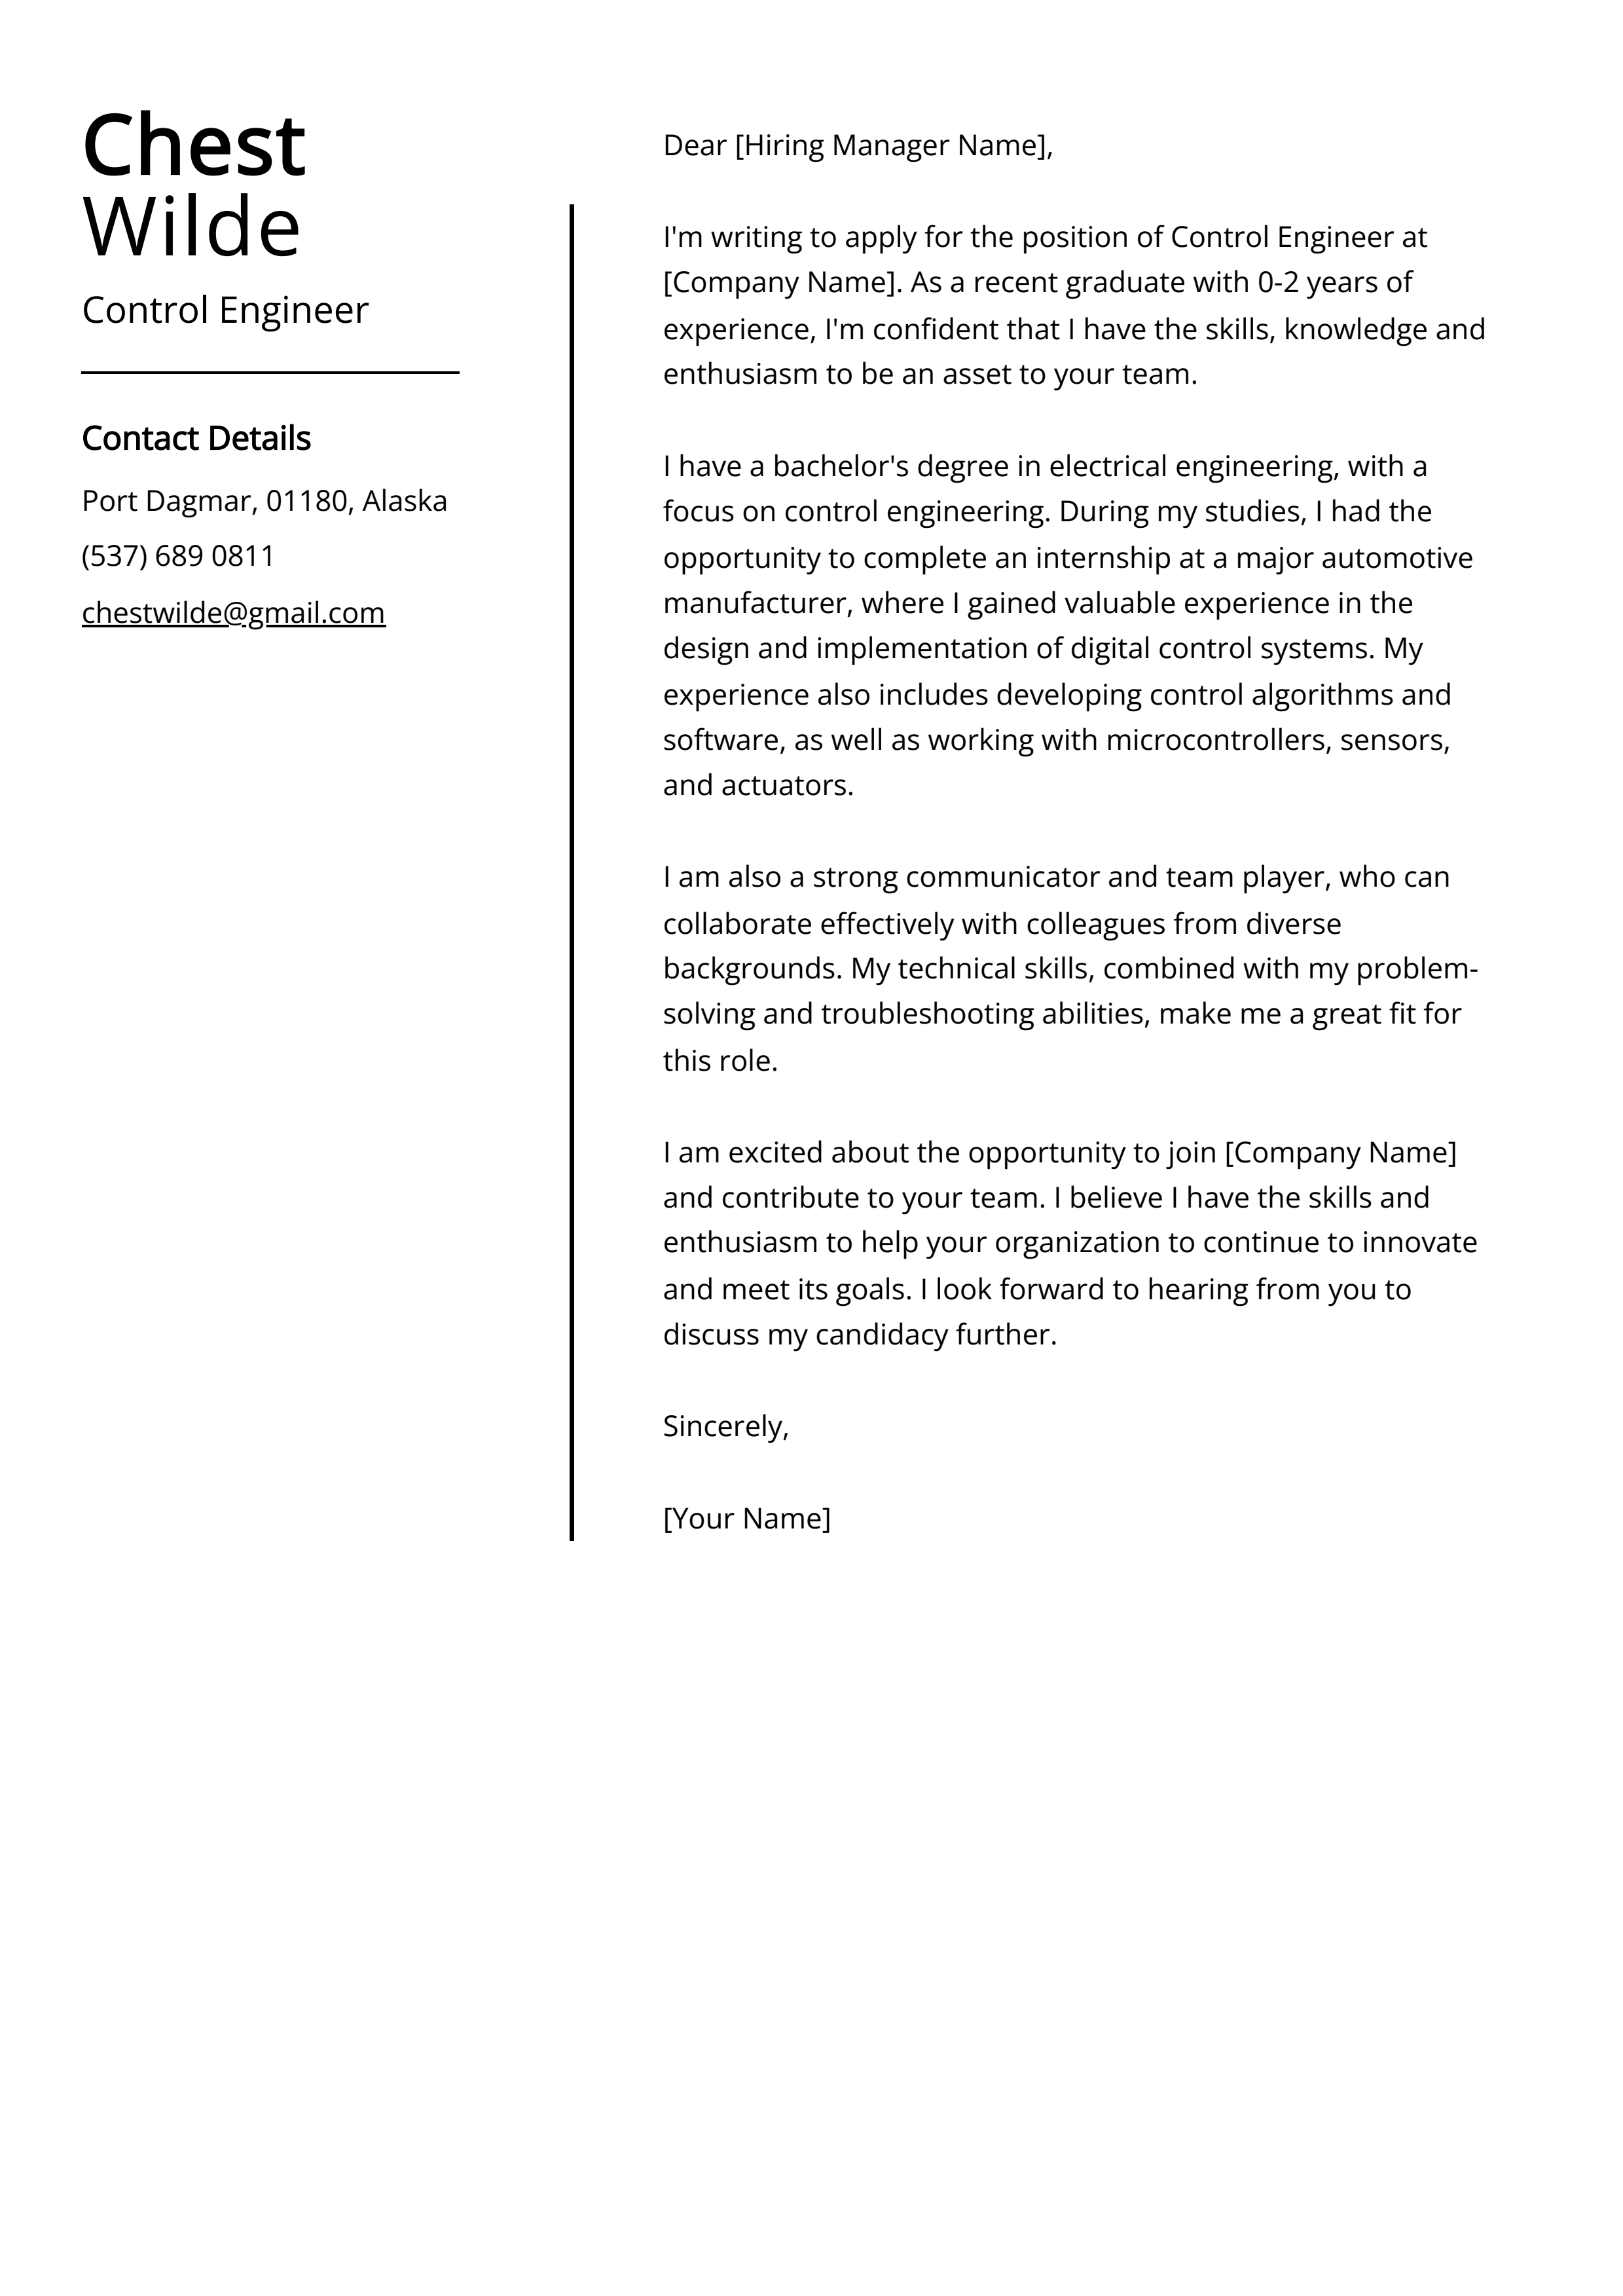 Control Engineer Cover Letter Example